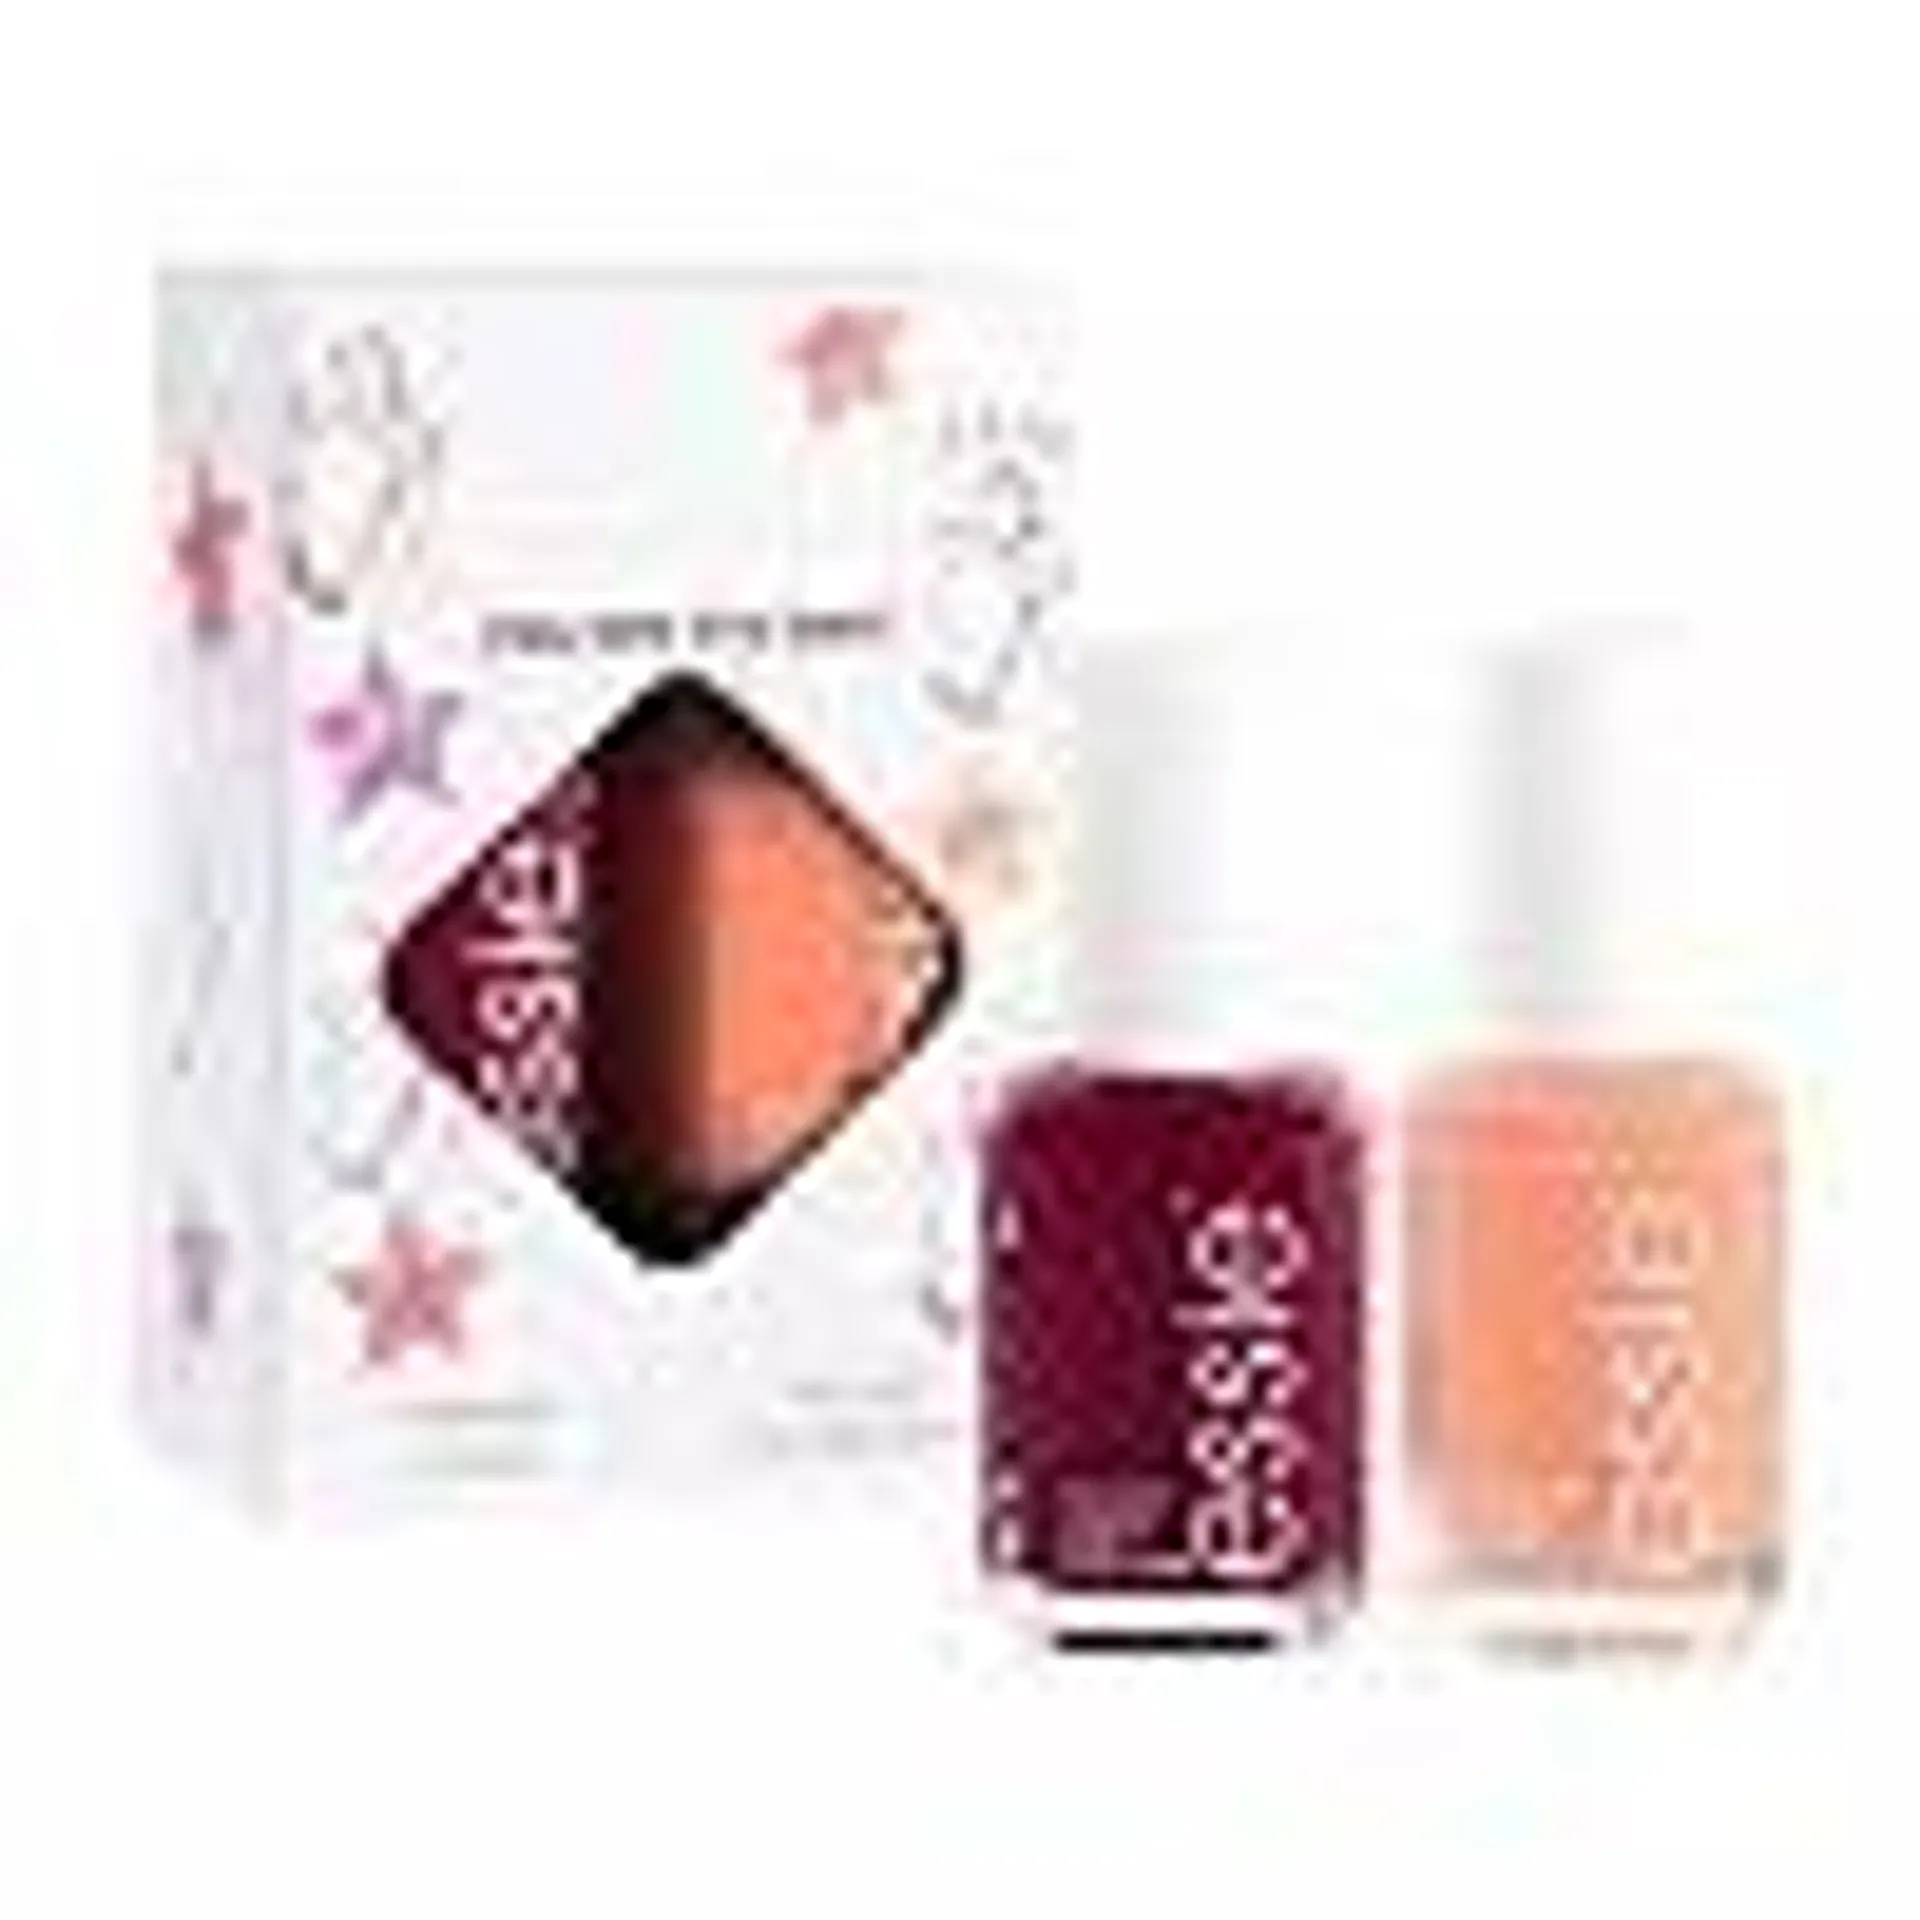 Essie Nail Polish You're The Best Gift Set